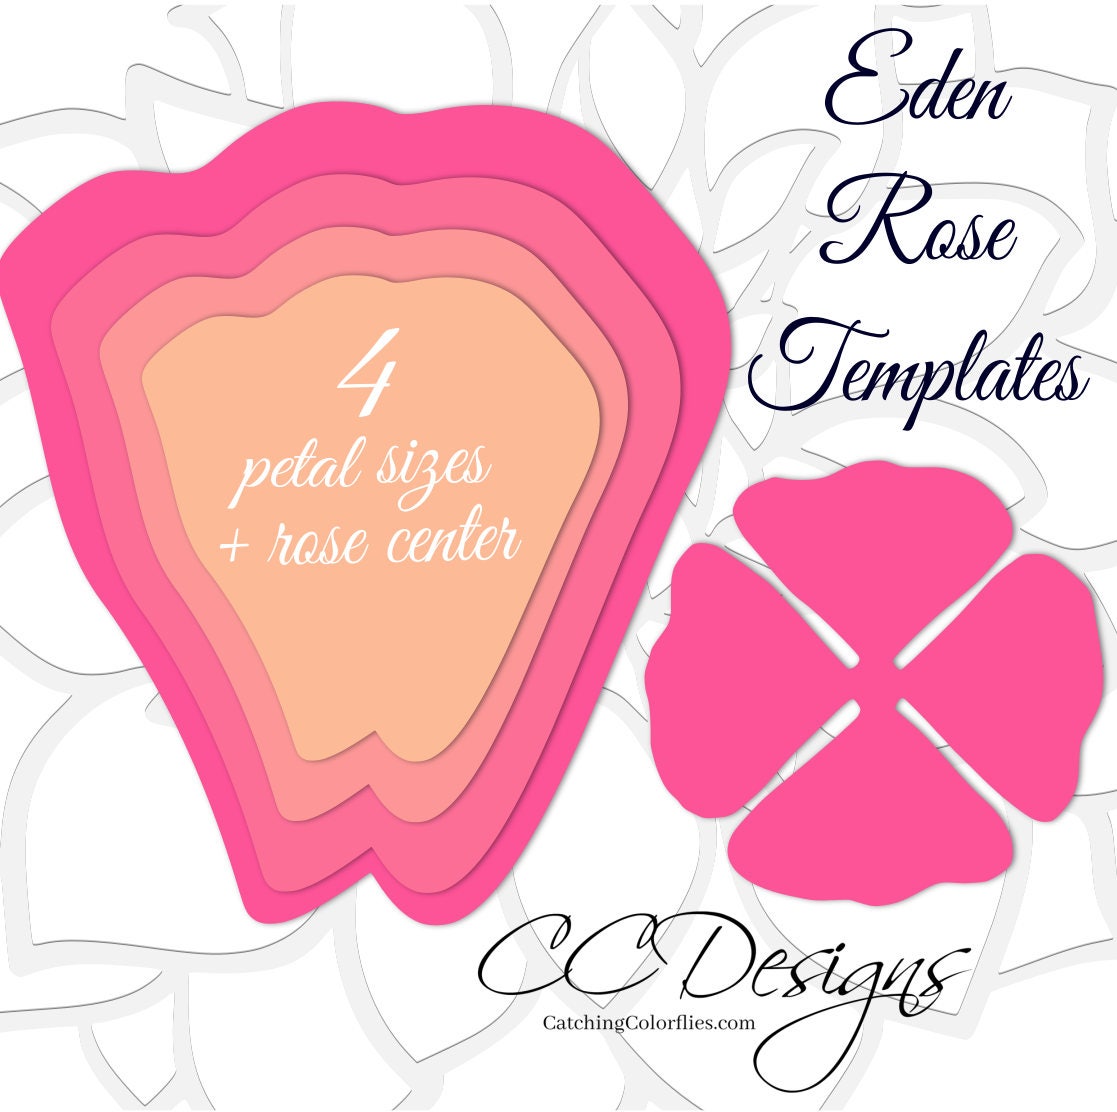 giant-paper-rose-templates-easy-printable-pdf-rose-template